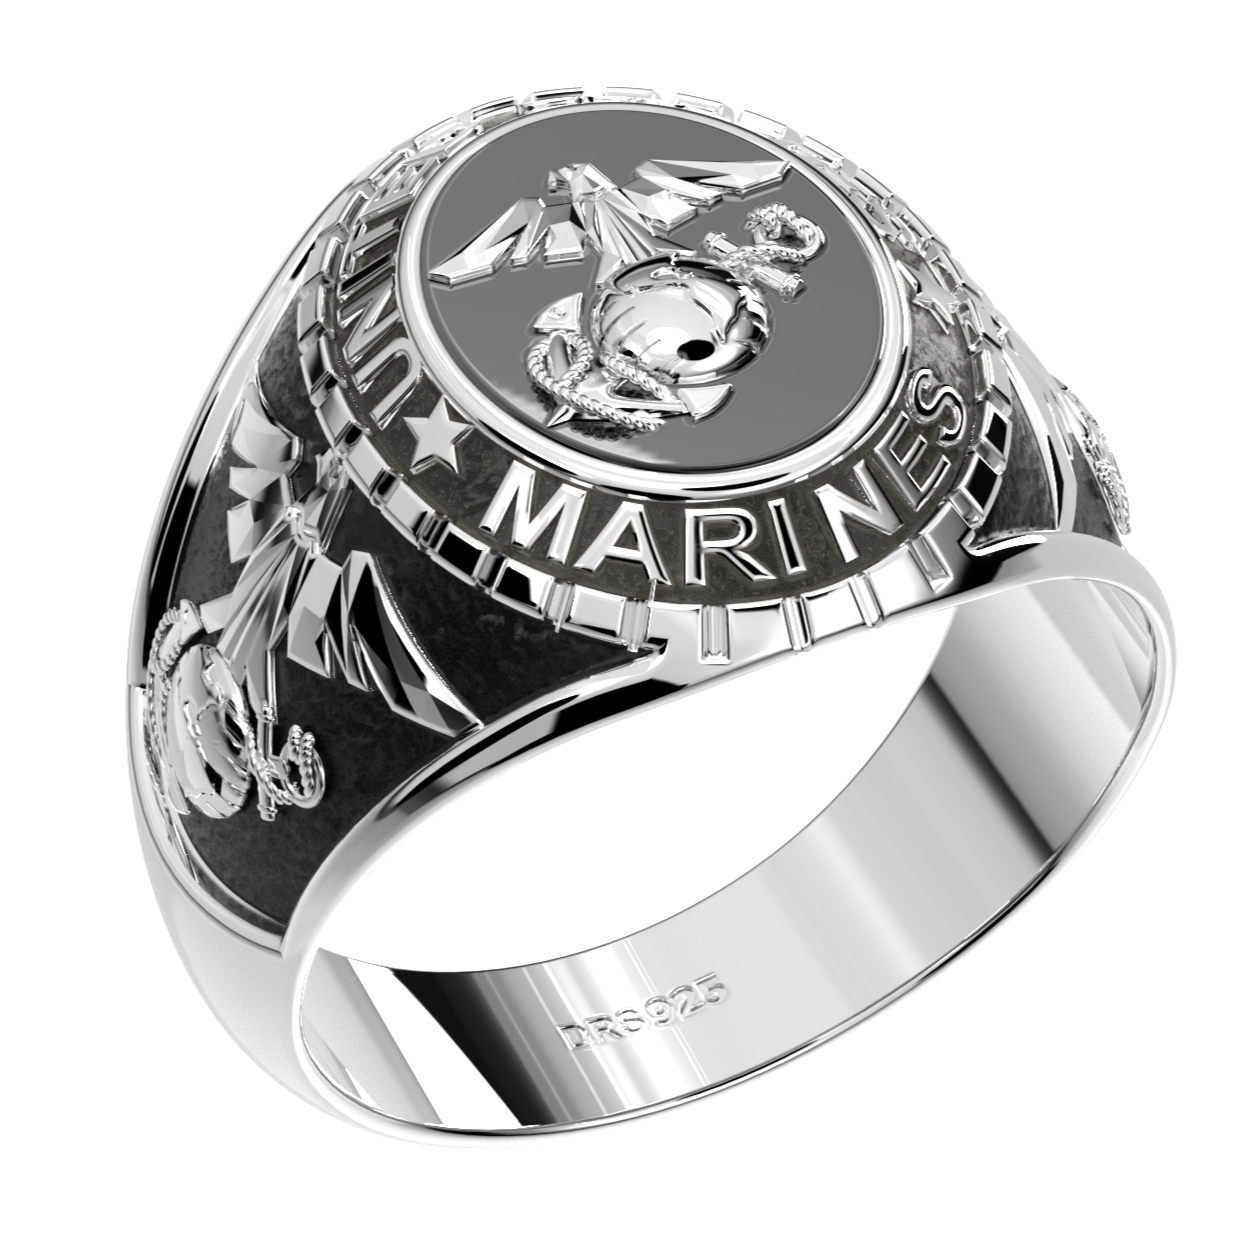 Men's 925 Sterling Silver US Marine Corps Solid Back Ring